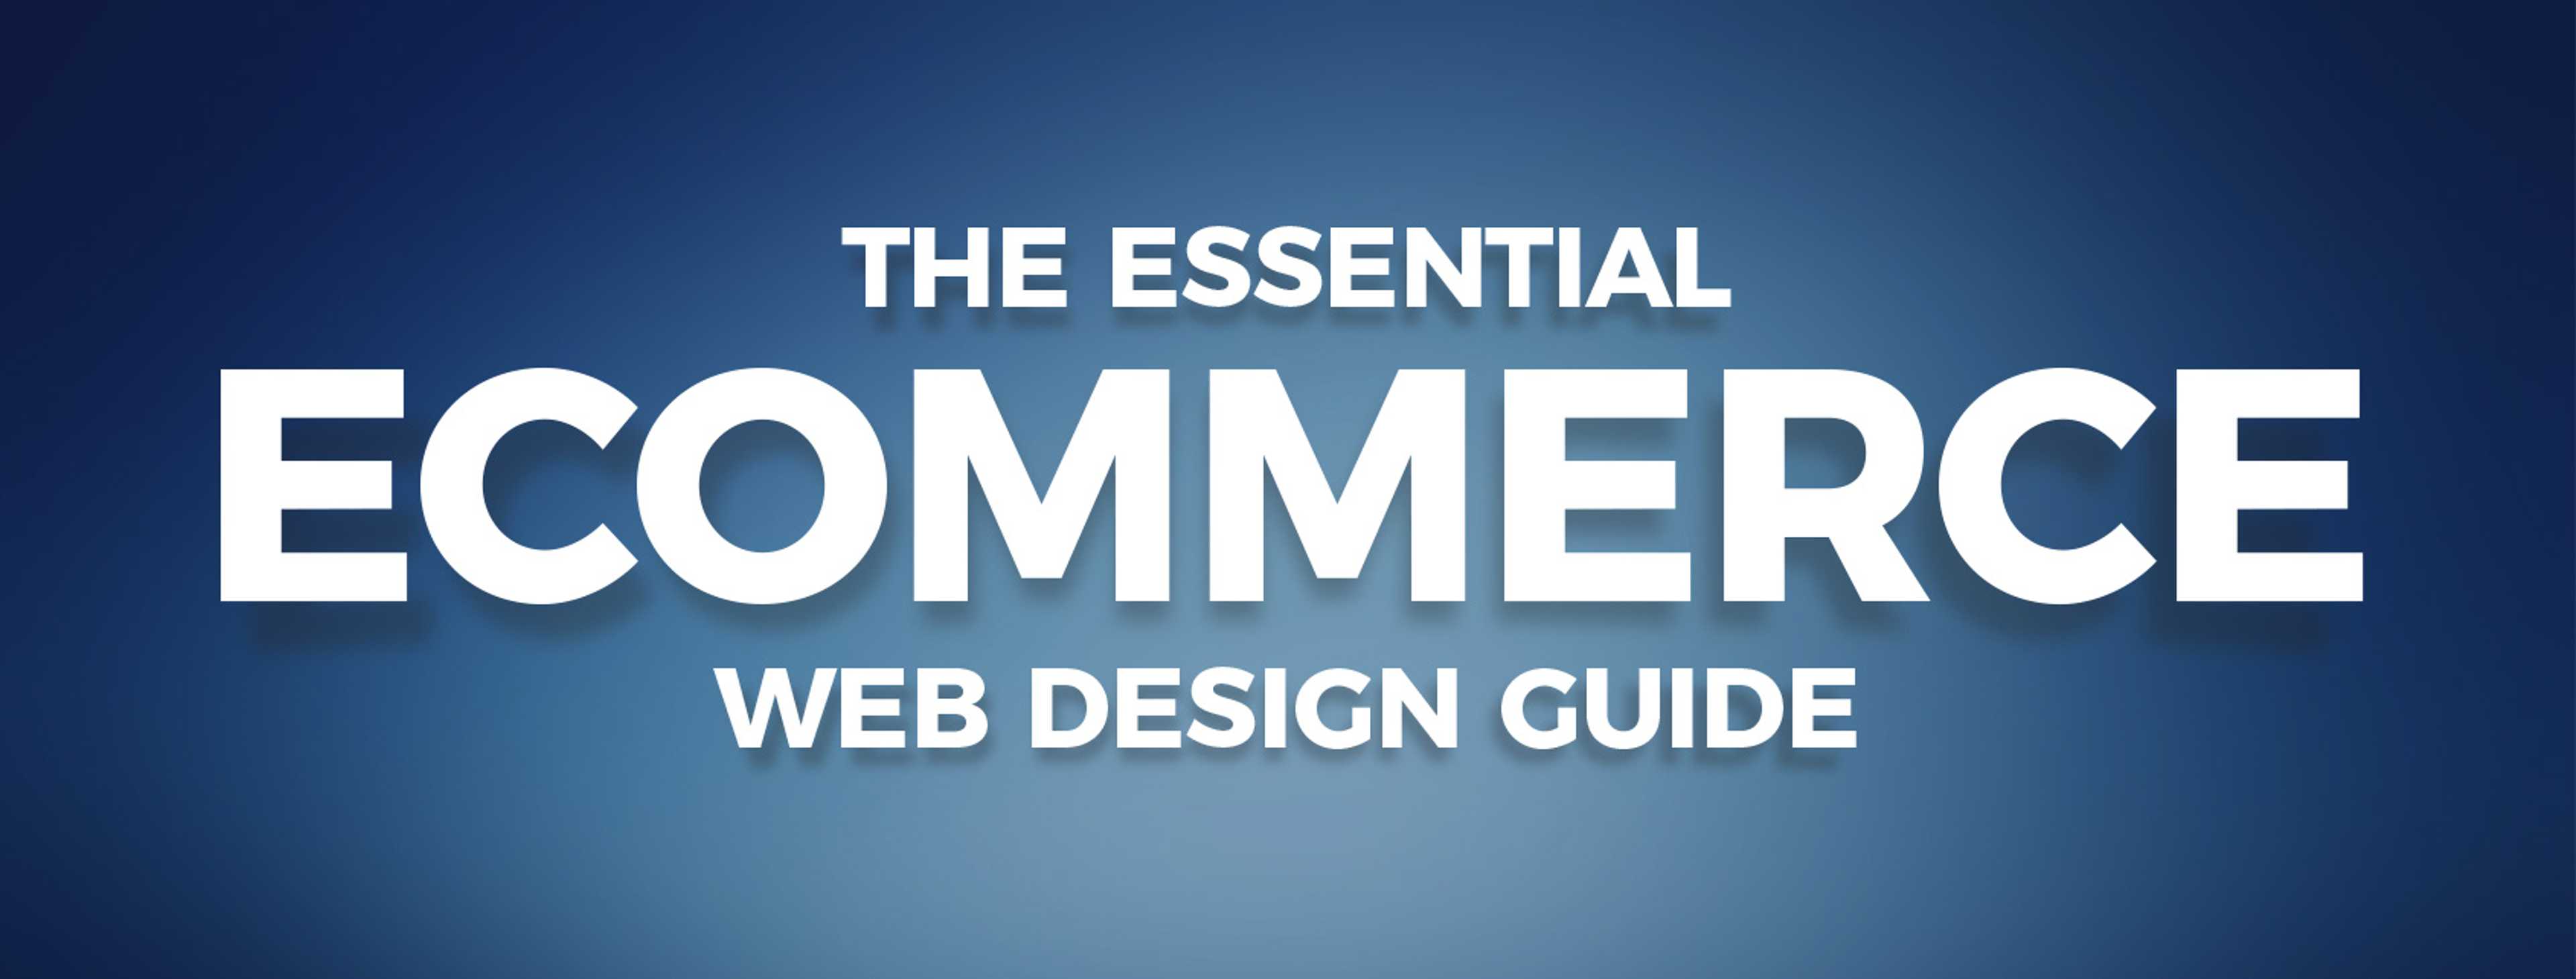 Cover for The Essential Ecommerce Web Design Guide